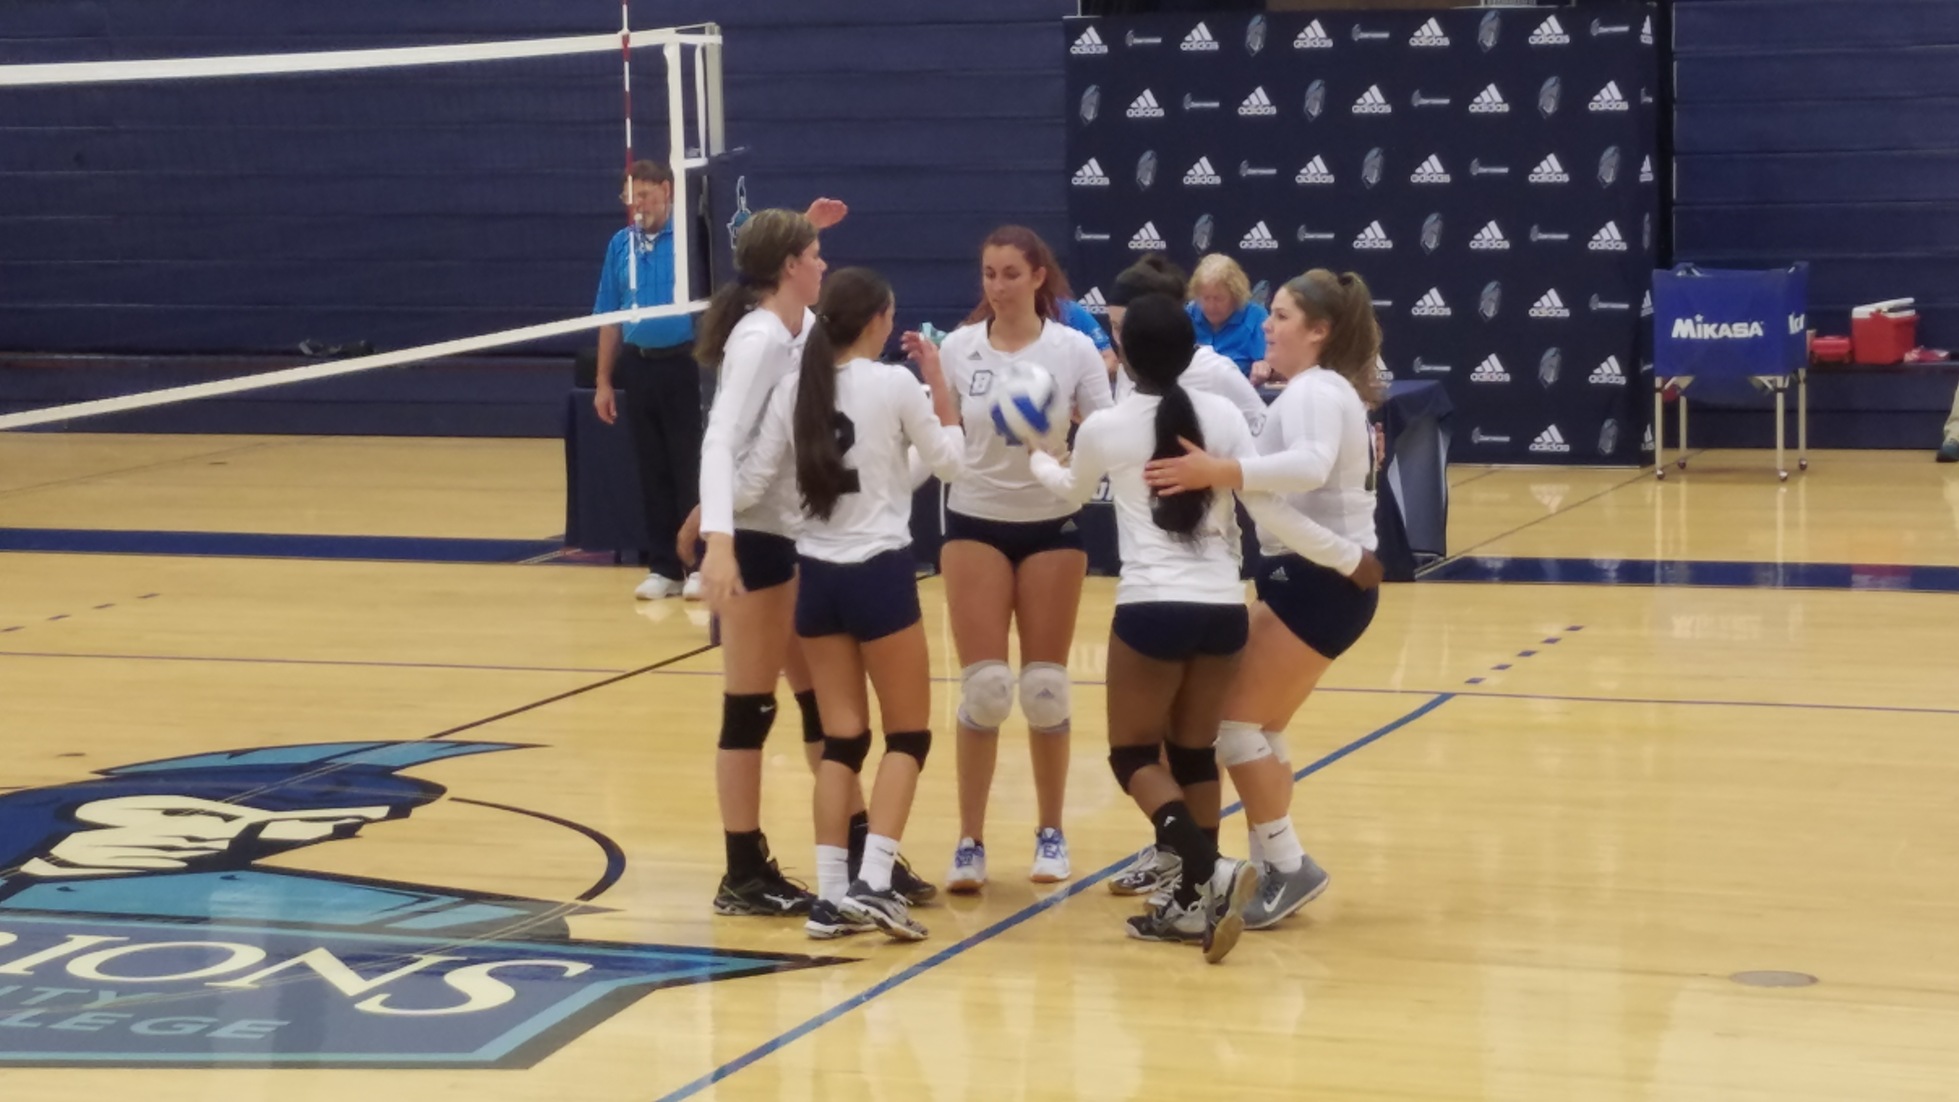 Women's Volleyball: Big improvement in game 2